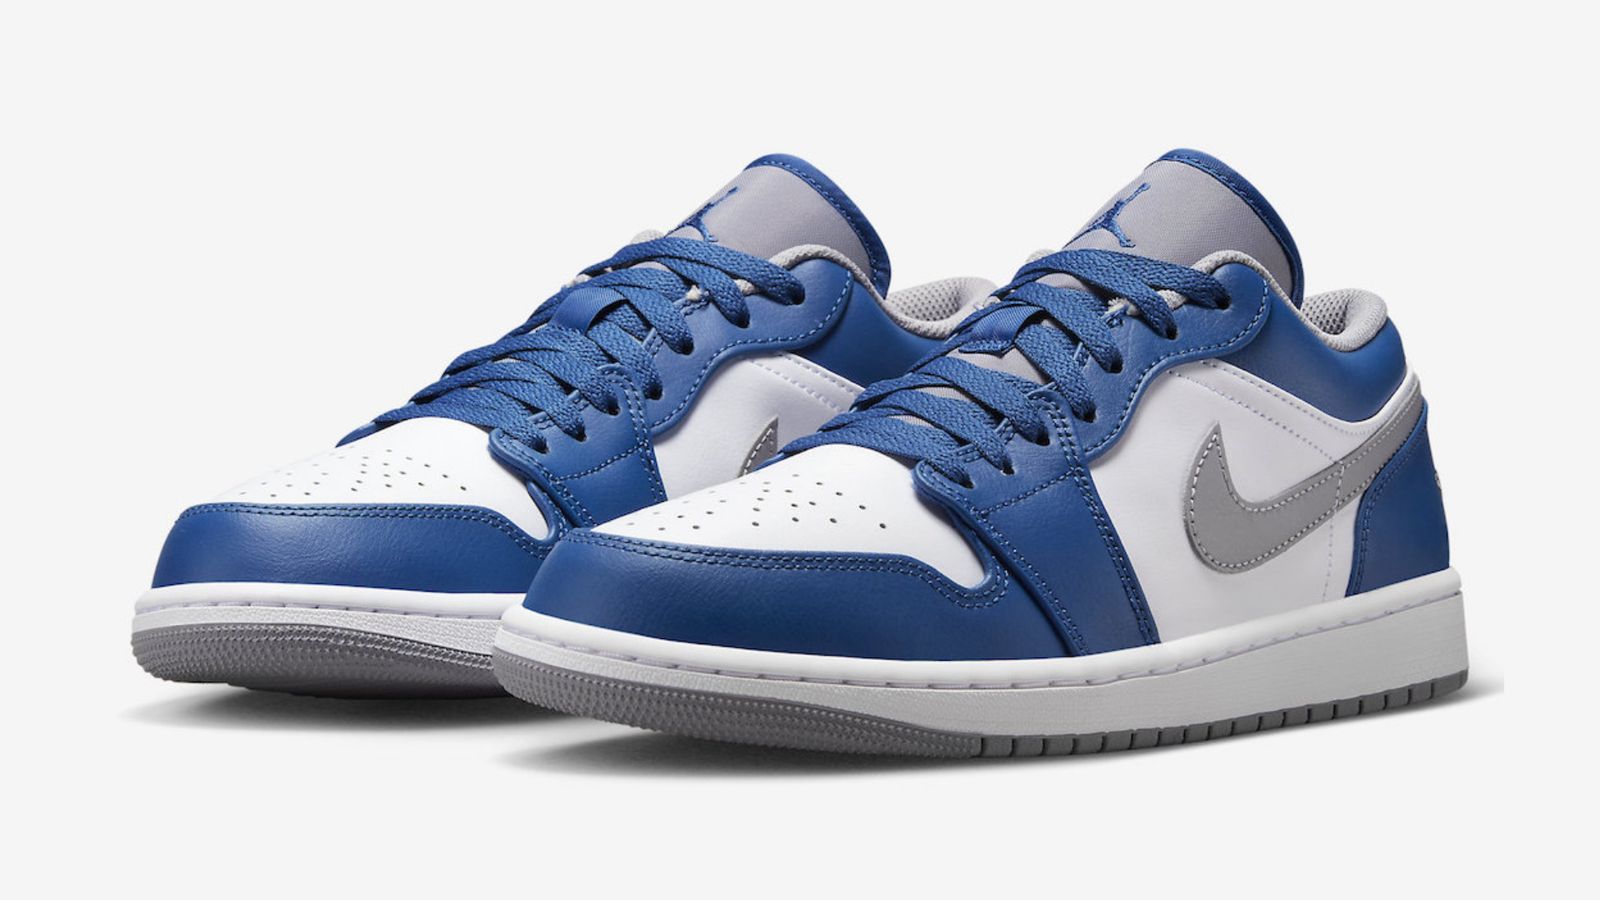 Air Jordan 1 Low "True Blue" product image of a blue and white low-top featuring gray details.